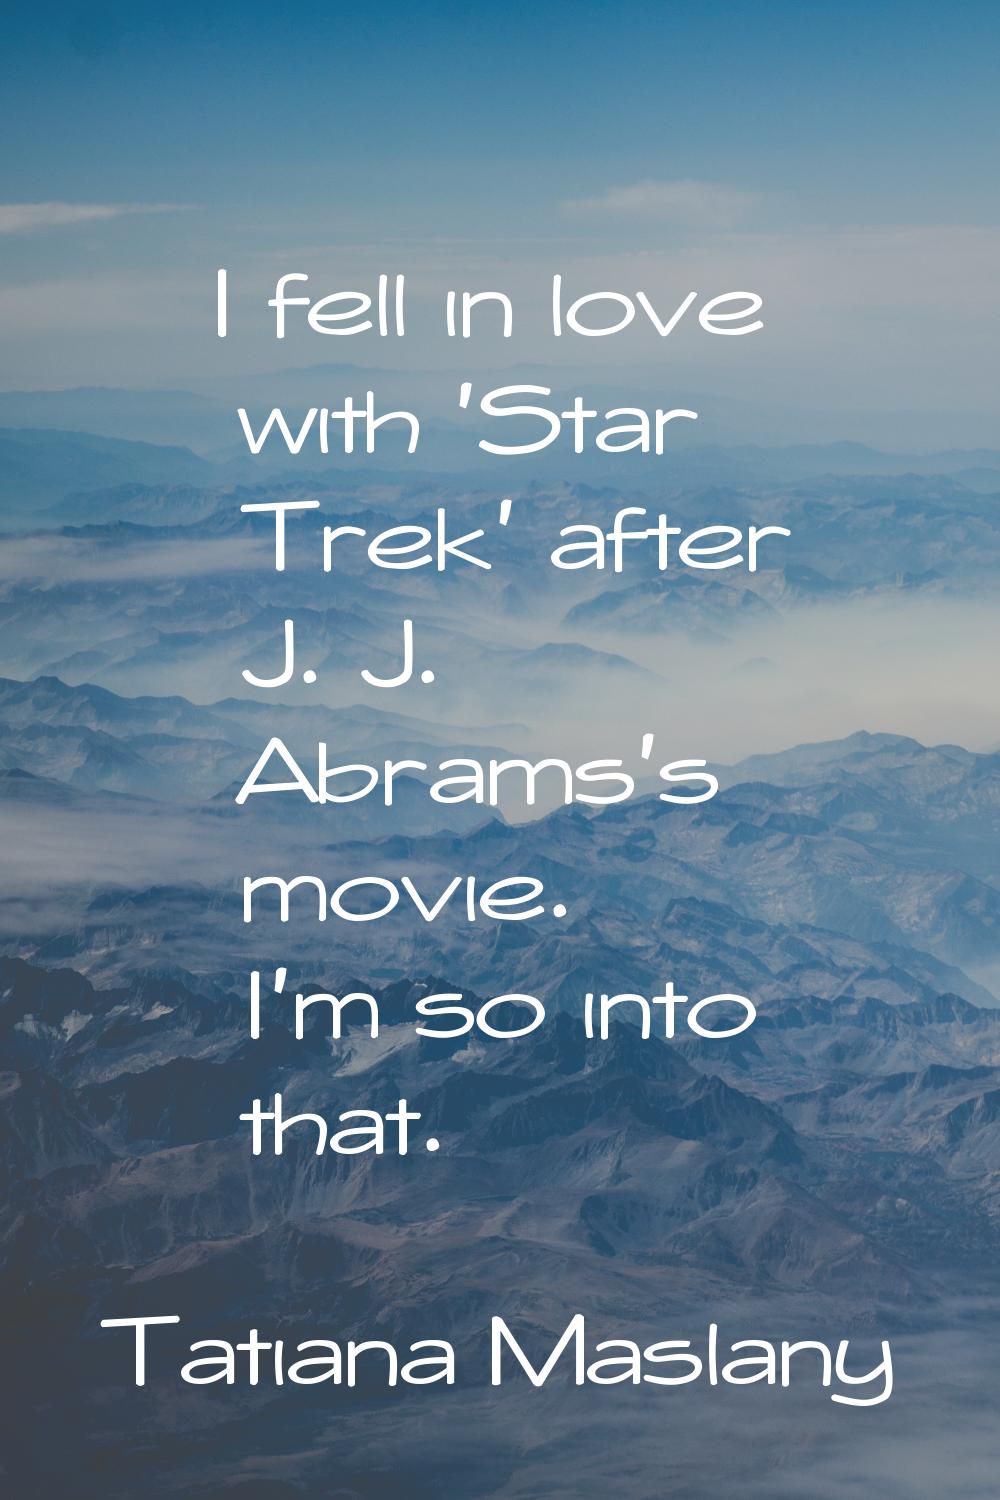 I fell in love with 'Star Trek' after J. J. Abrams's movie. I'm so into that.